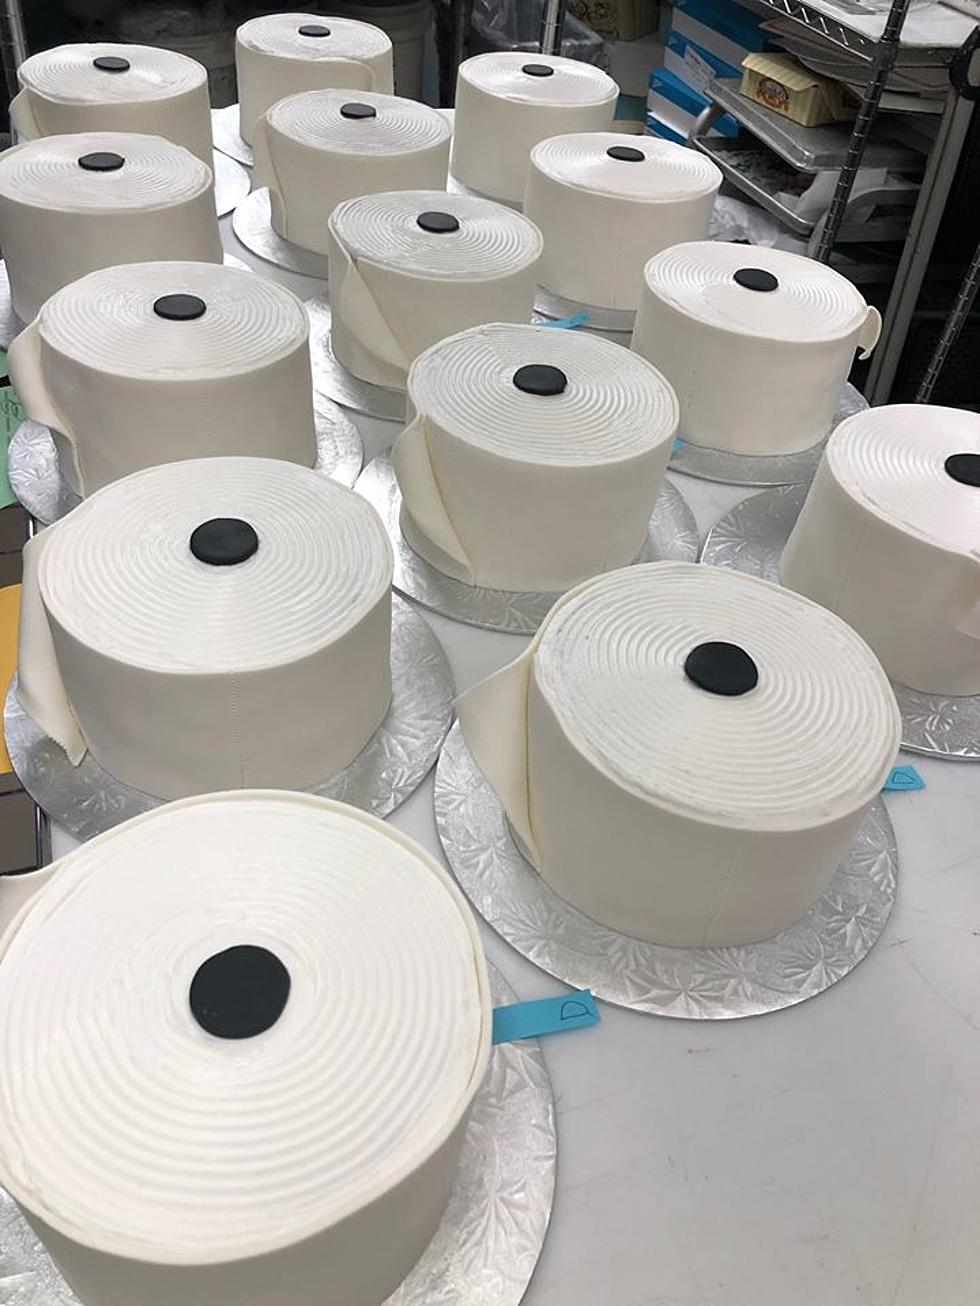 New Orleans Bakery Selling Toilet-Paper Shaped Cakes